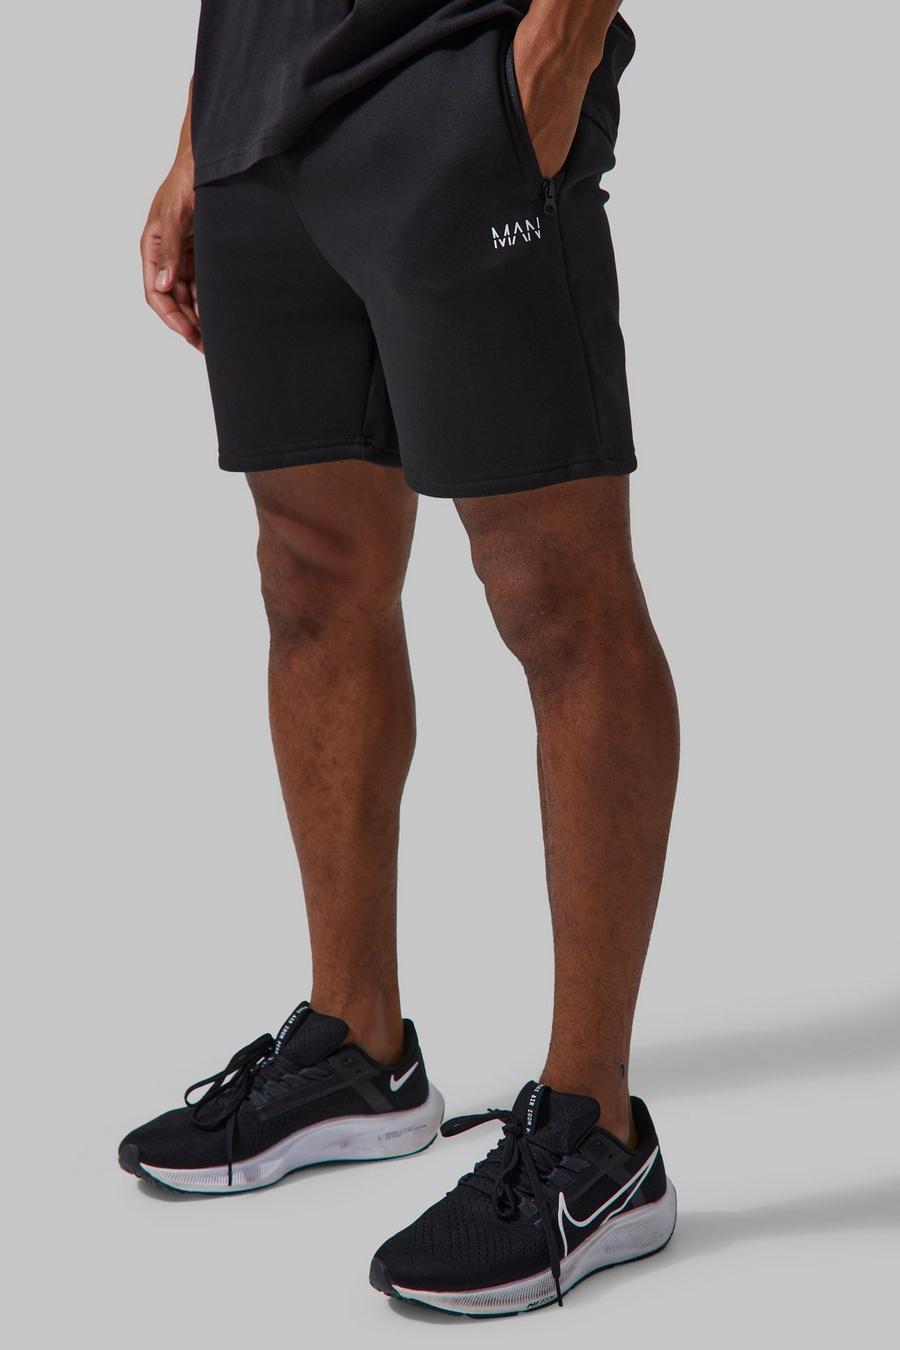 Black Man Active Muscle Fit Fitness Shorts